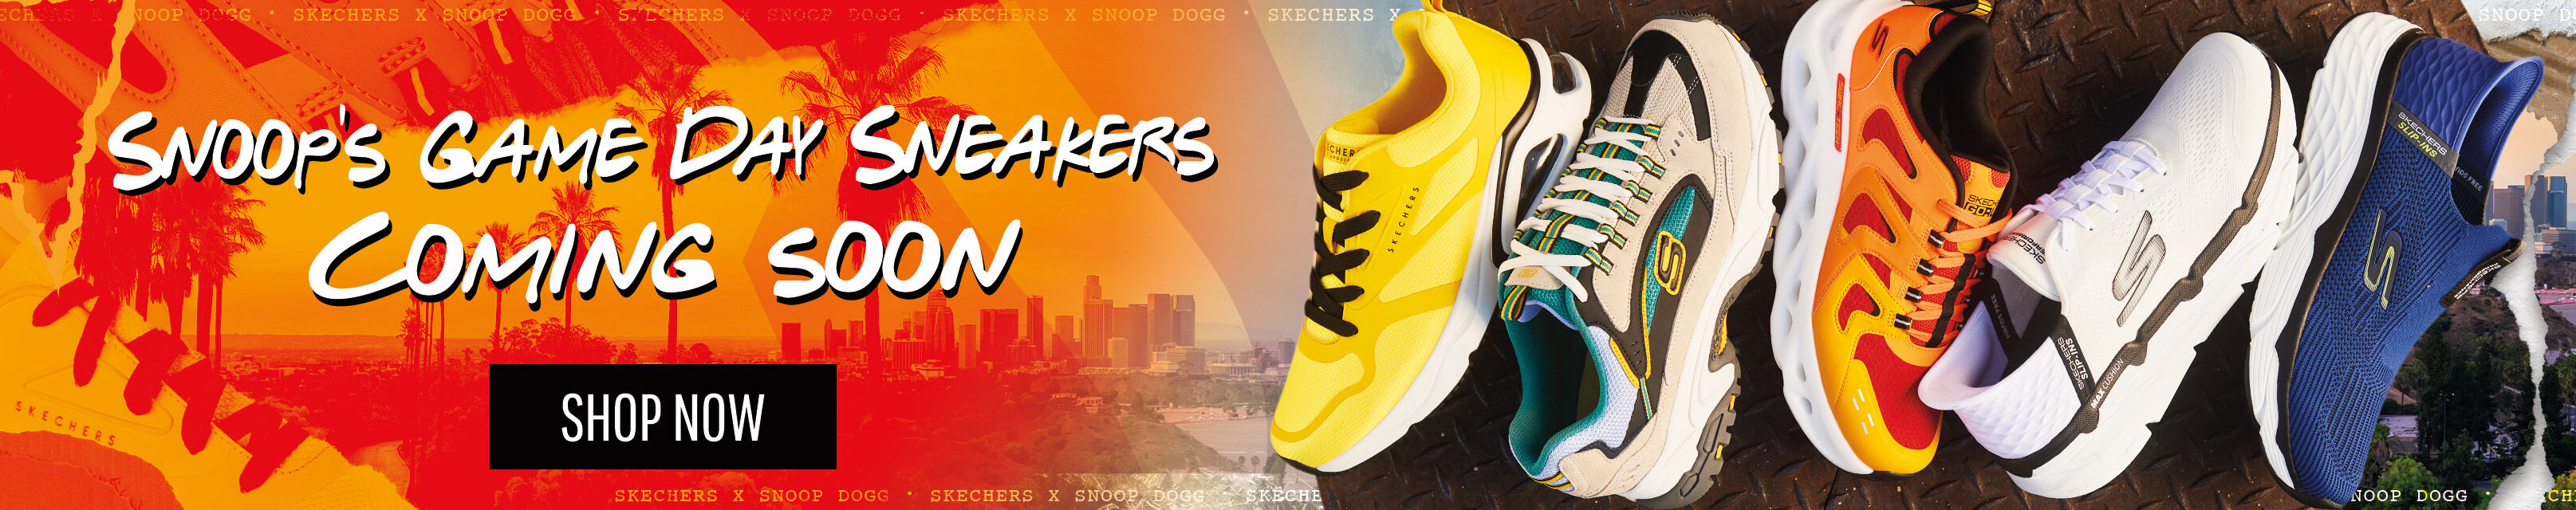 Snoops Game Day Sneakers - Coming Soon